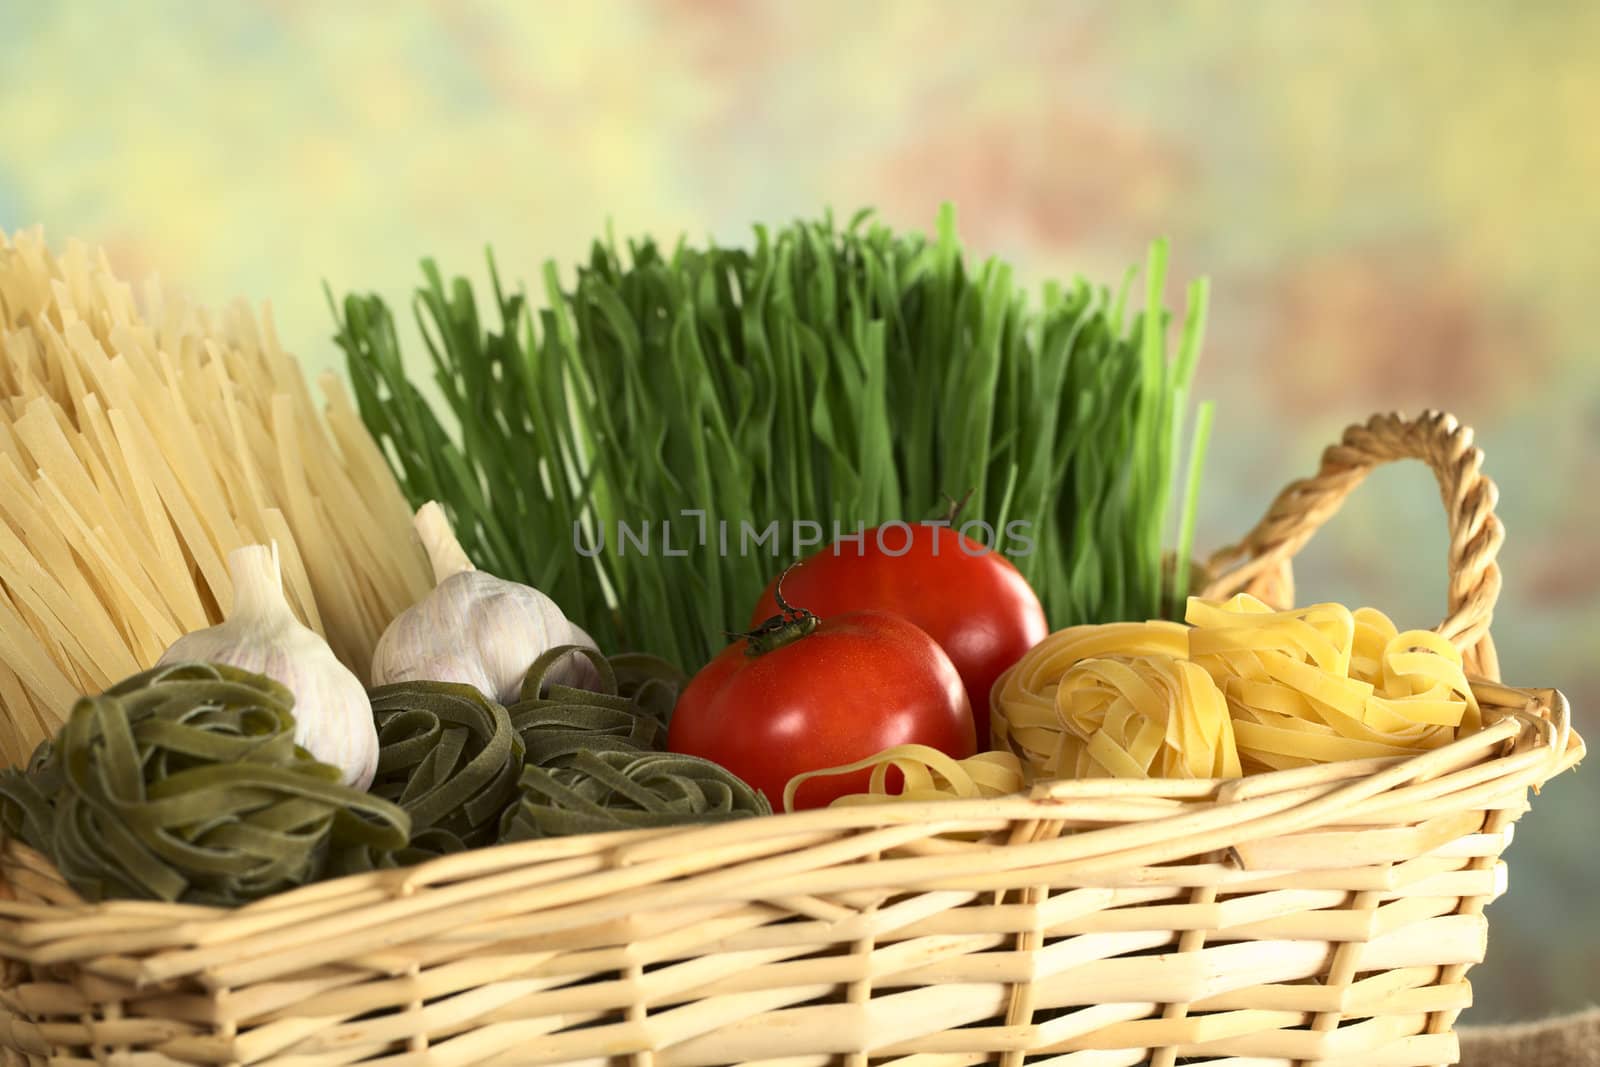 Raw green and yellow tagliatelle paglia e fieno (straw and hay) with raw tomatoes and garlic bulbs (Selective Focus, Focus on the front of the yellow tagliatelle, the first tomato and the front of the garlic bulb in the back) 